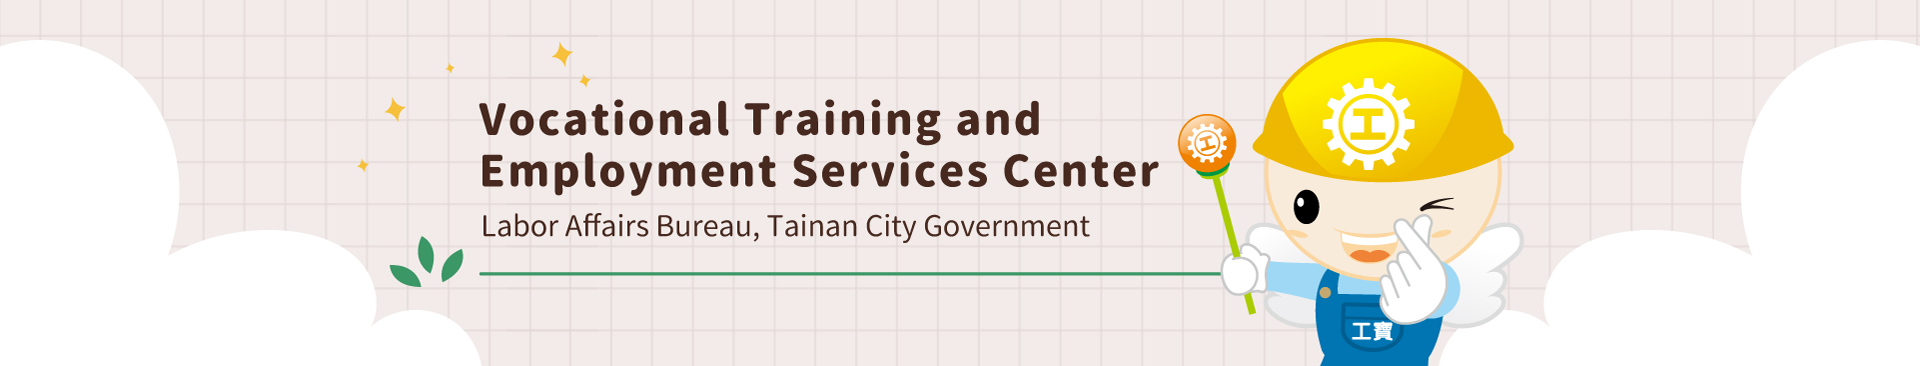 Vocational Training and Employment Services Center - banner